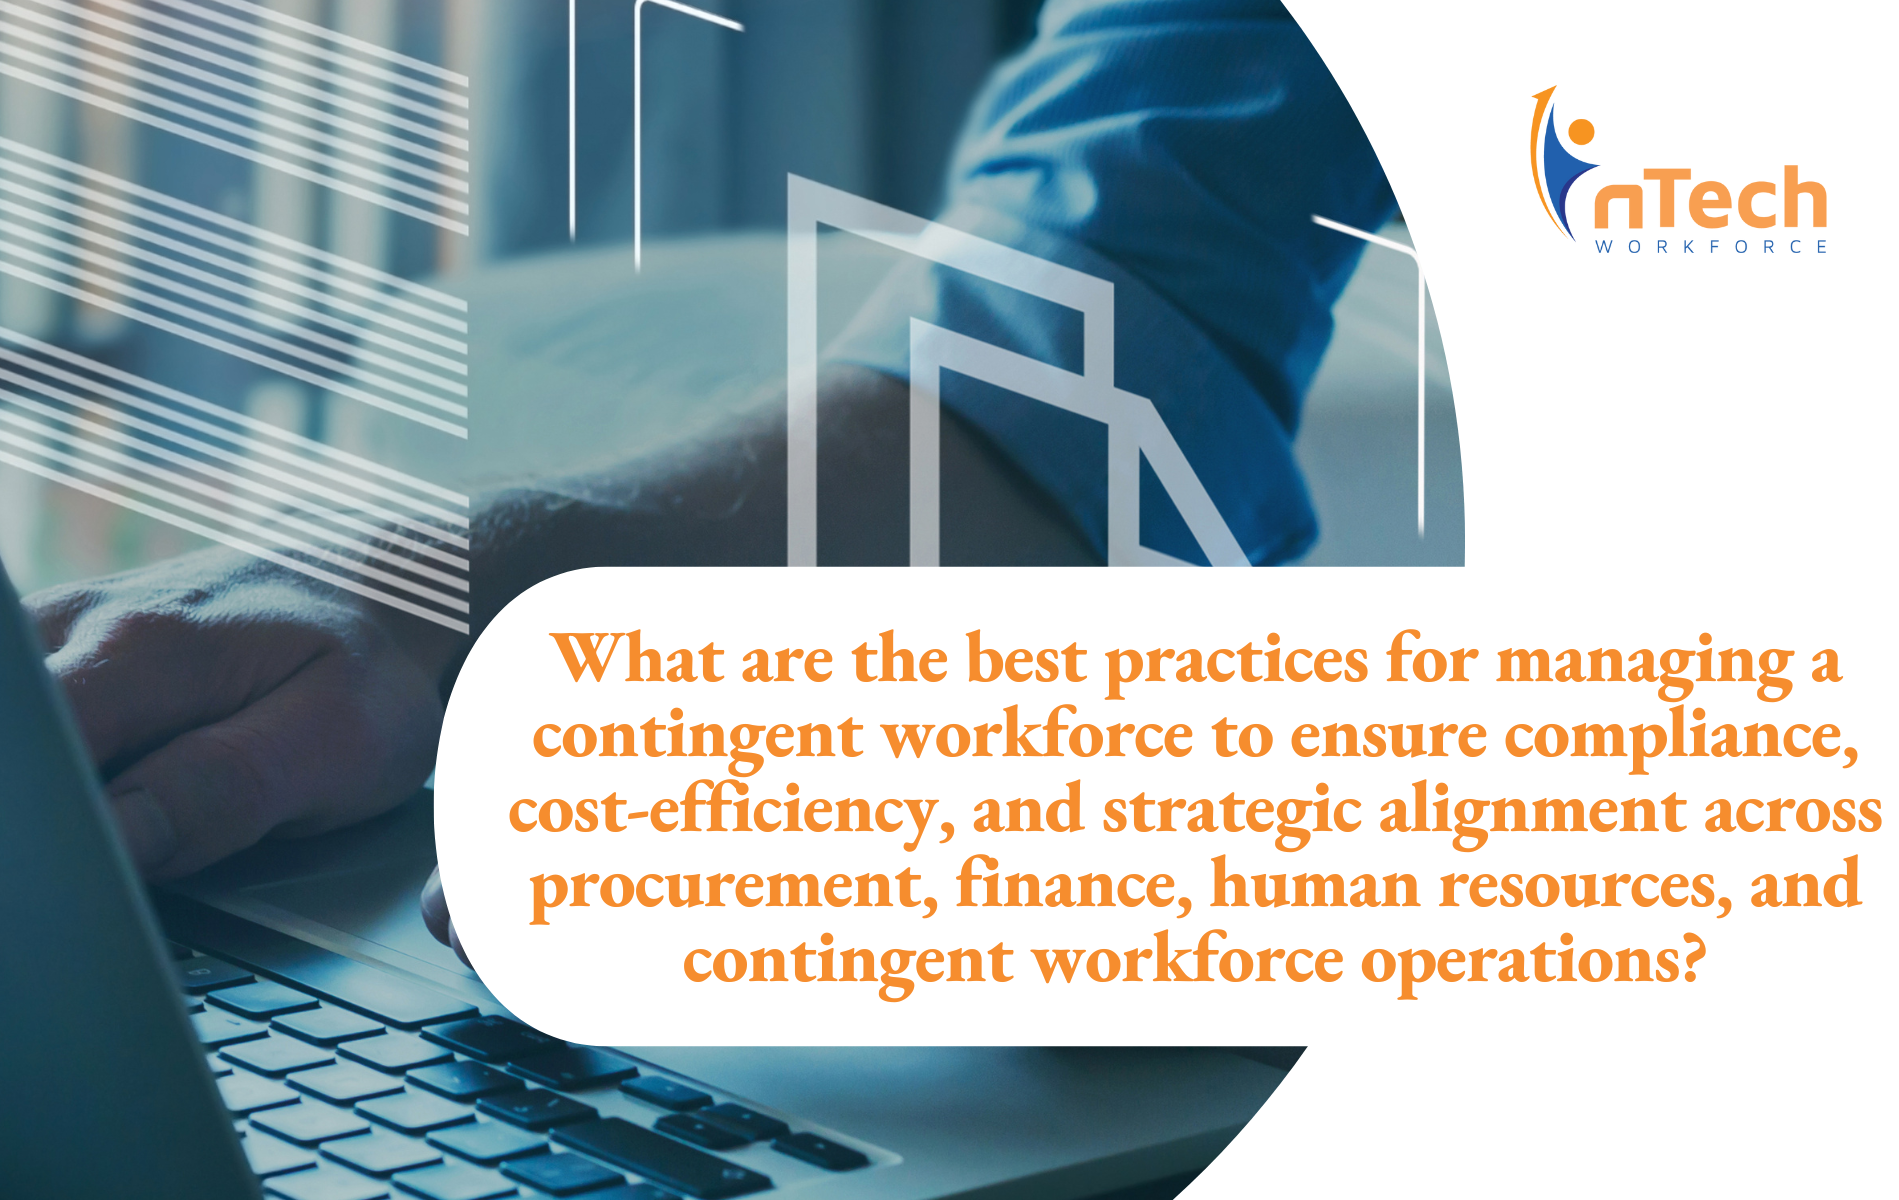 What are the best practices for managing a contingent workforce to ensure compliance, cost-efficiency, and strategic alignment?